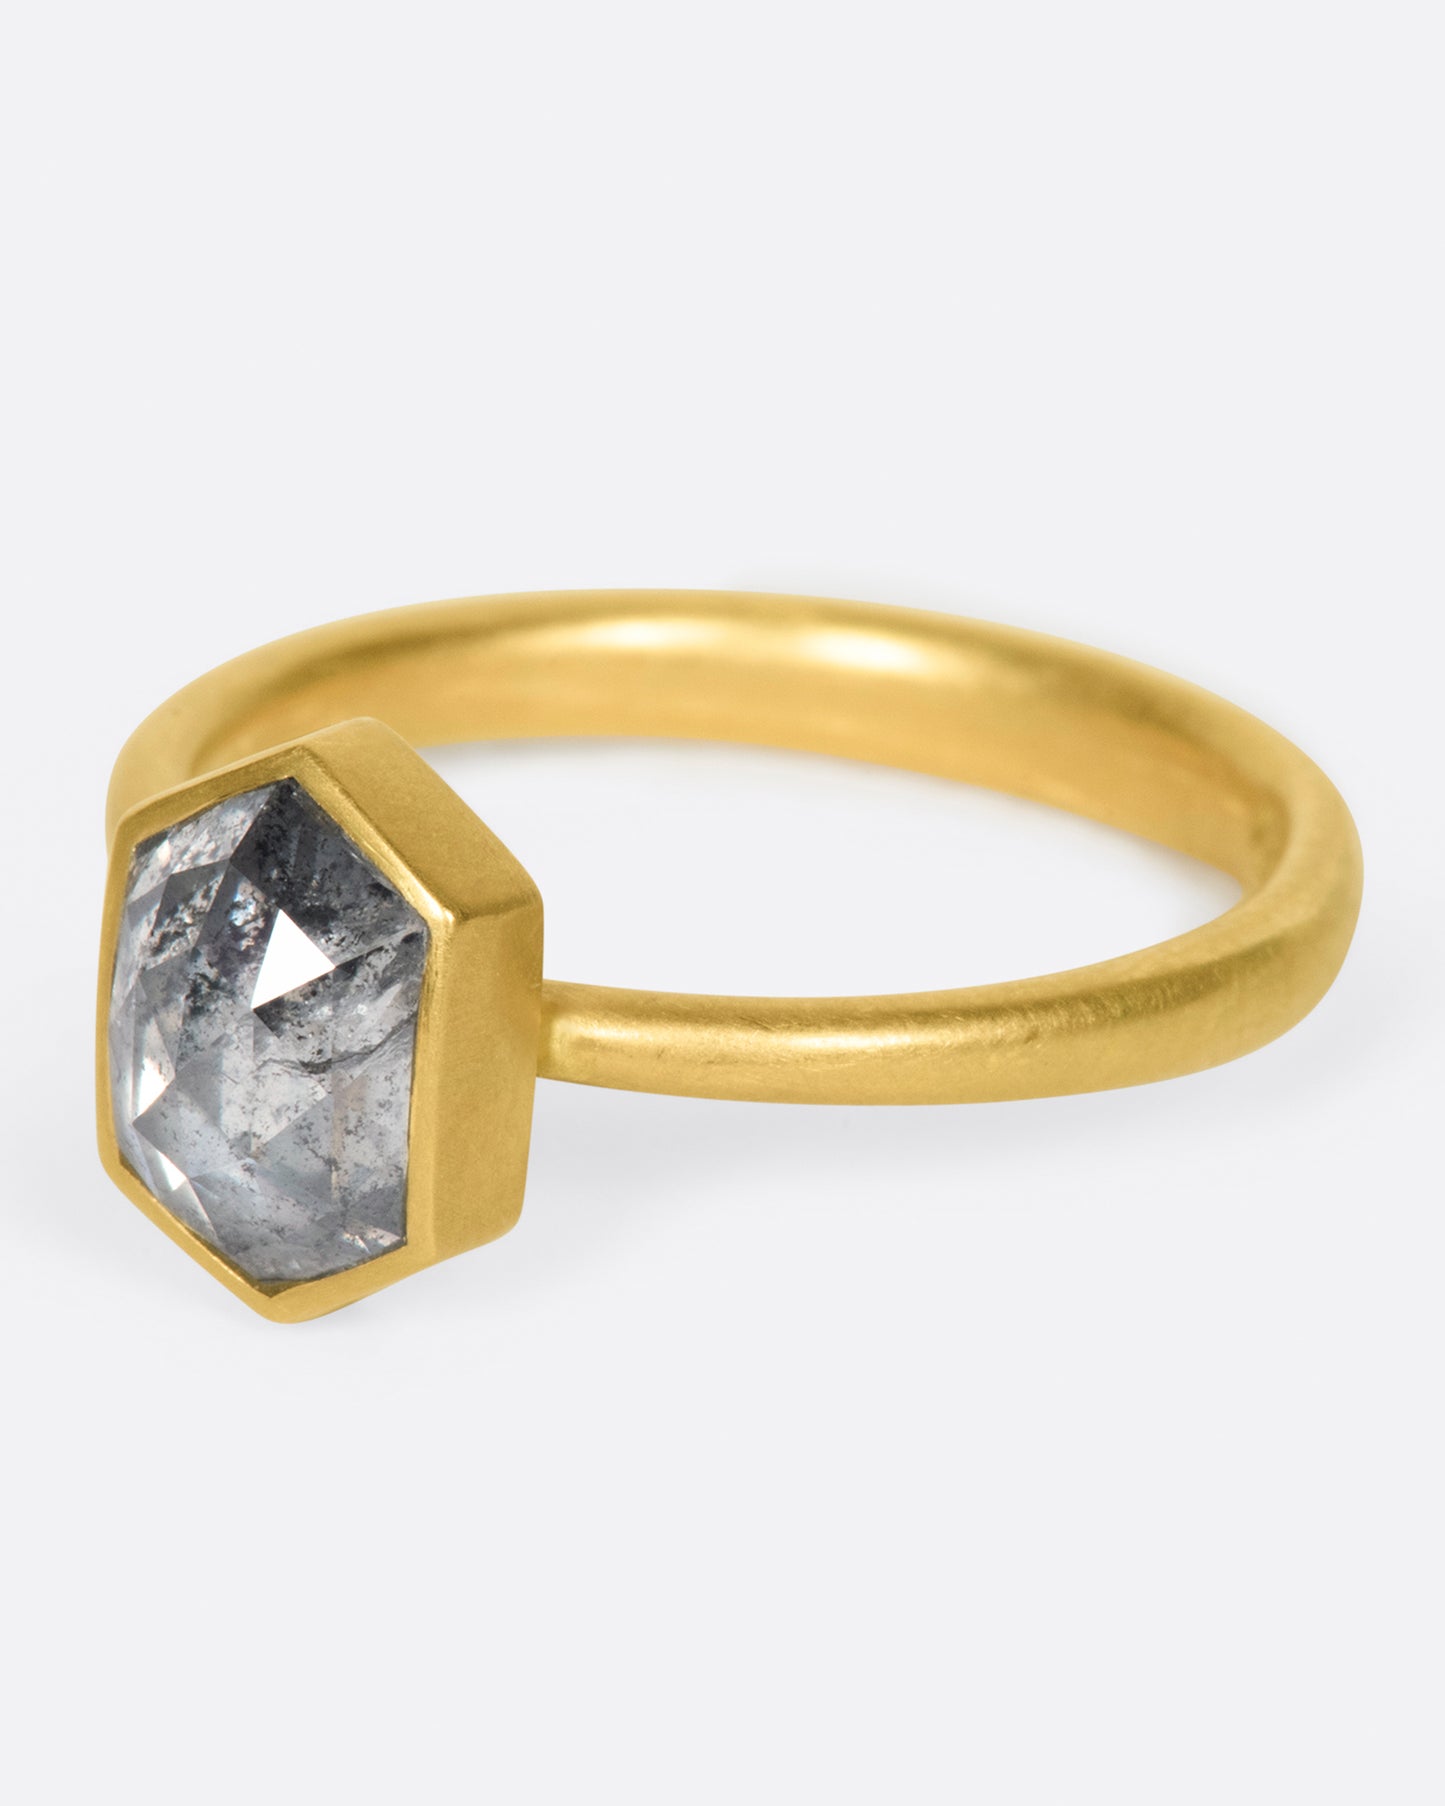 A salt and peppery hexagonal diamond shines in a bezel setting atop this ring.